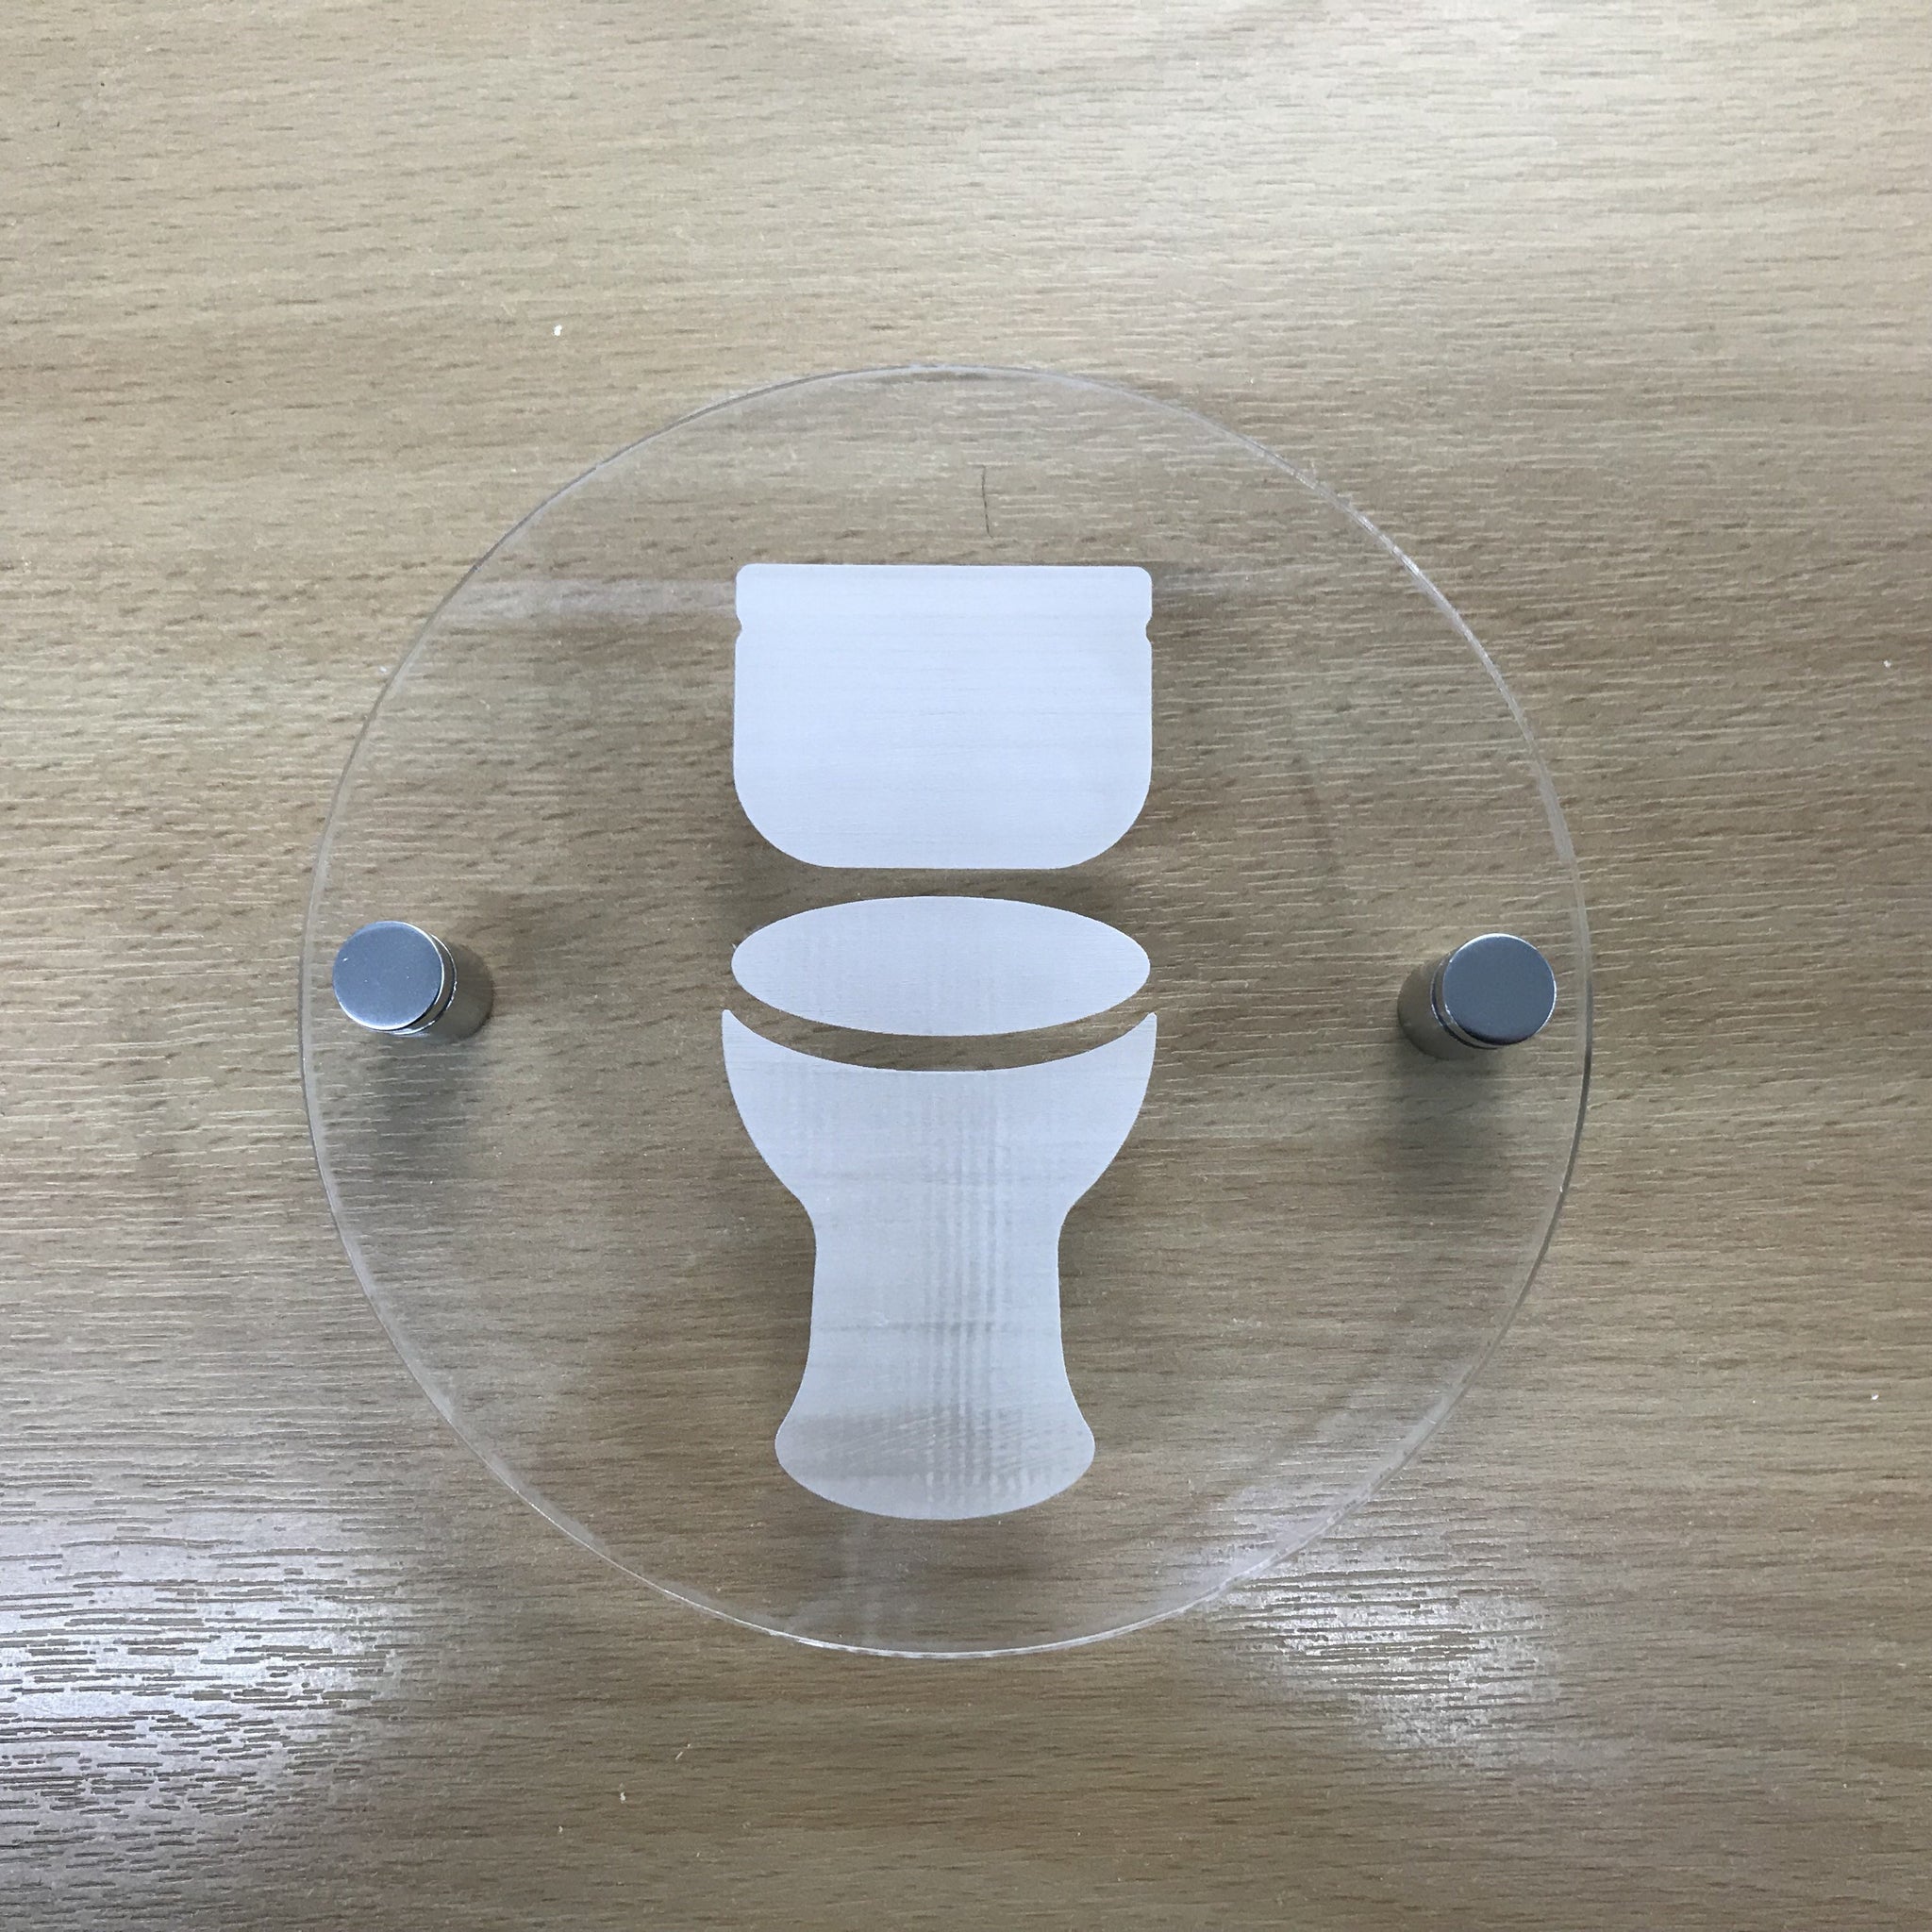 Round Engraved Toilet Sign - Clear Gloss Finish